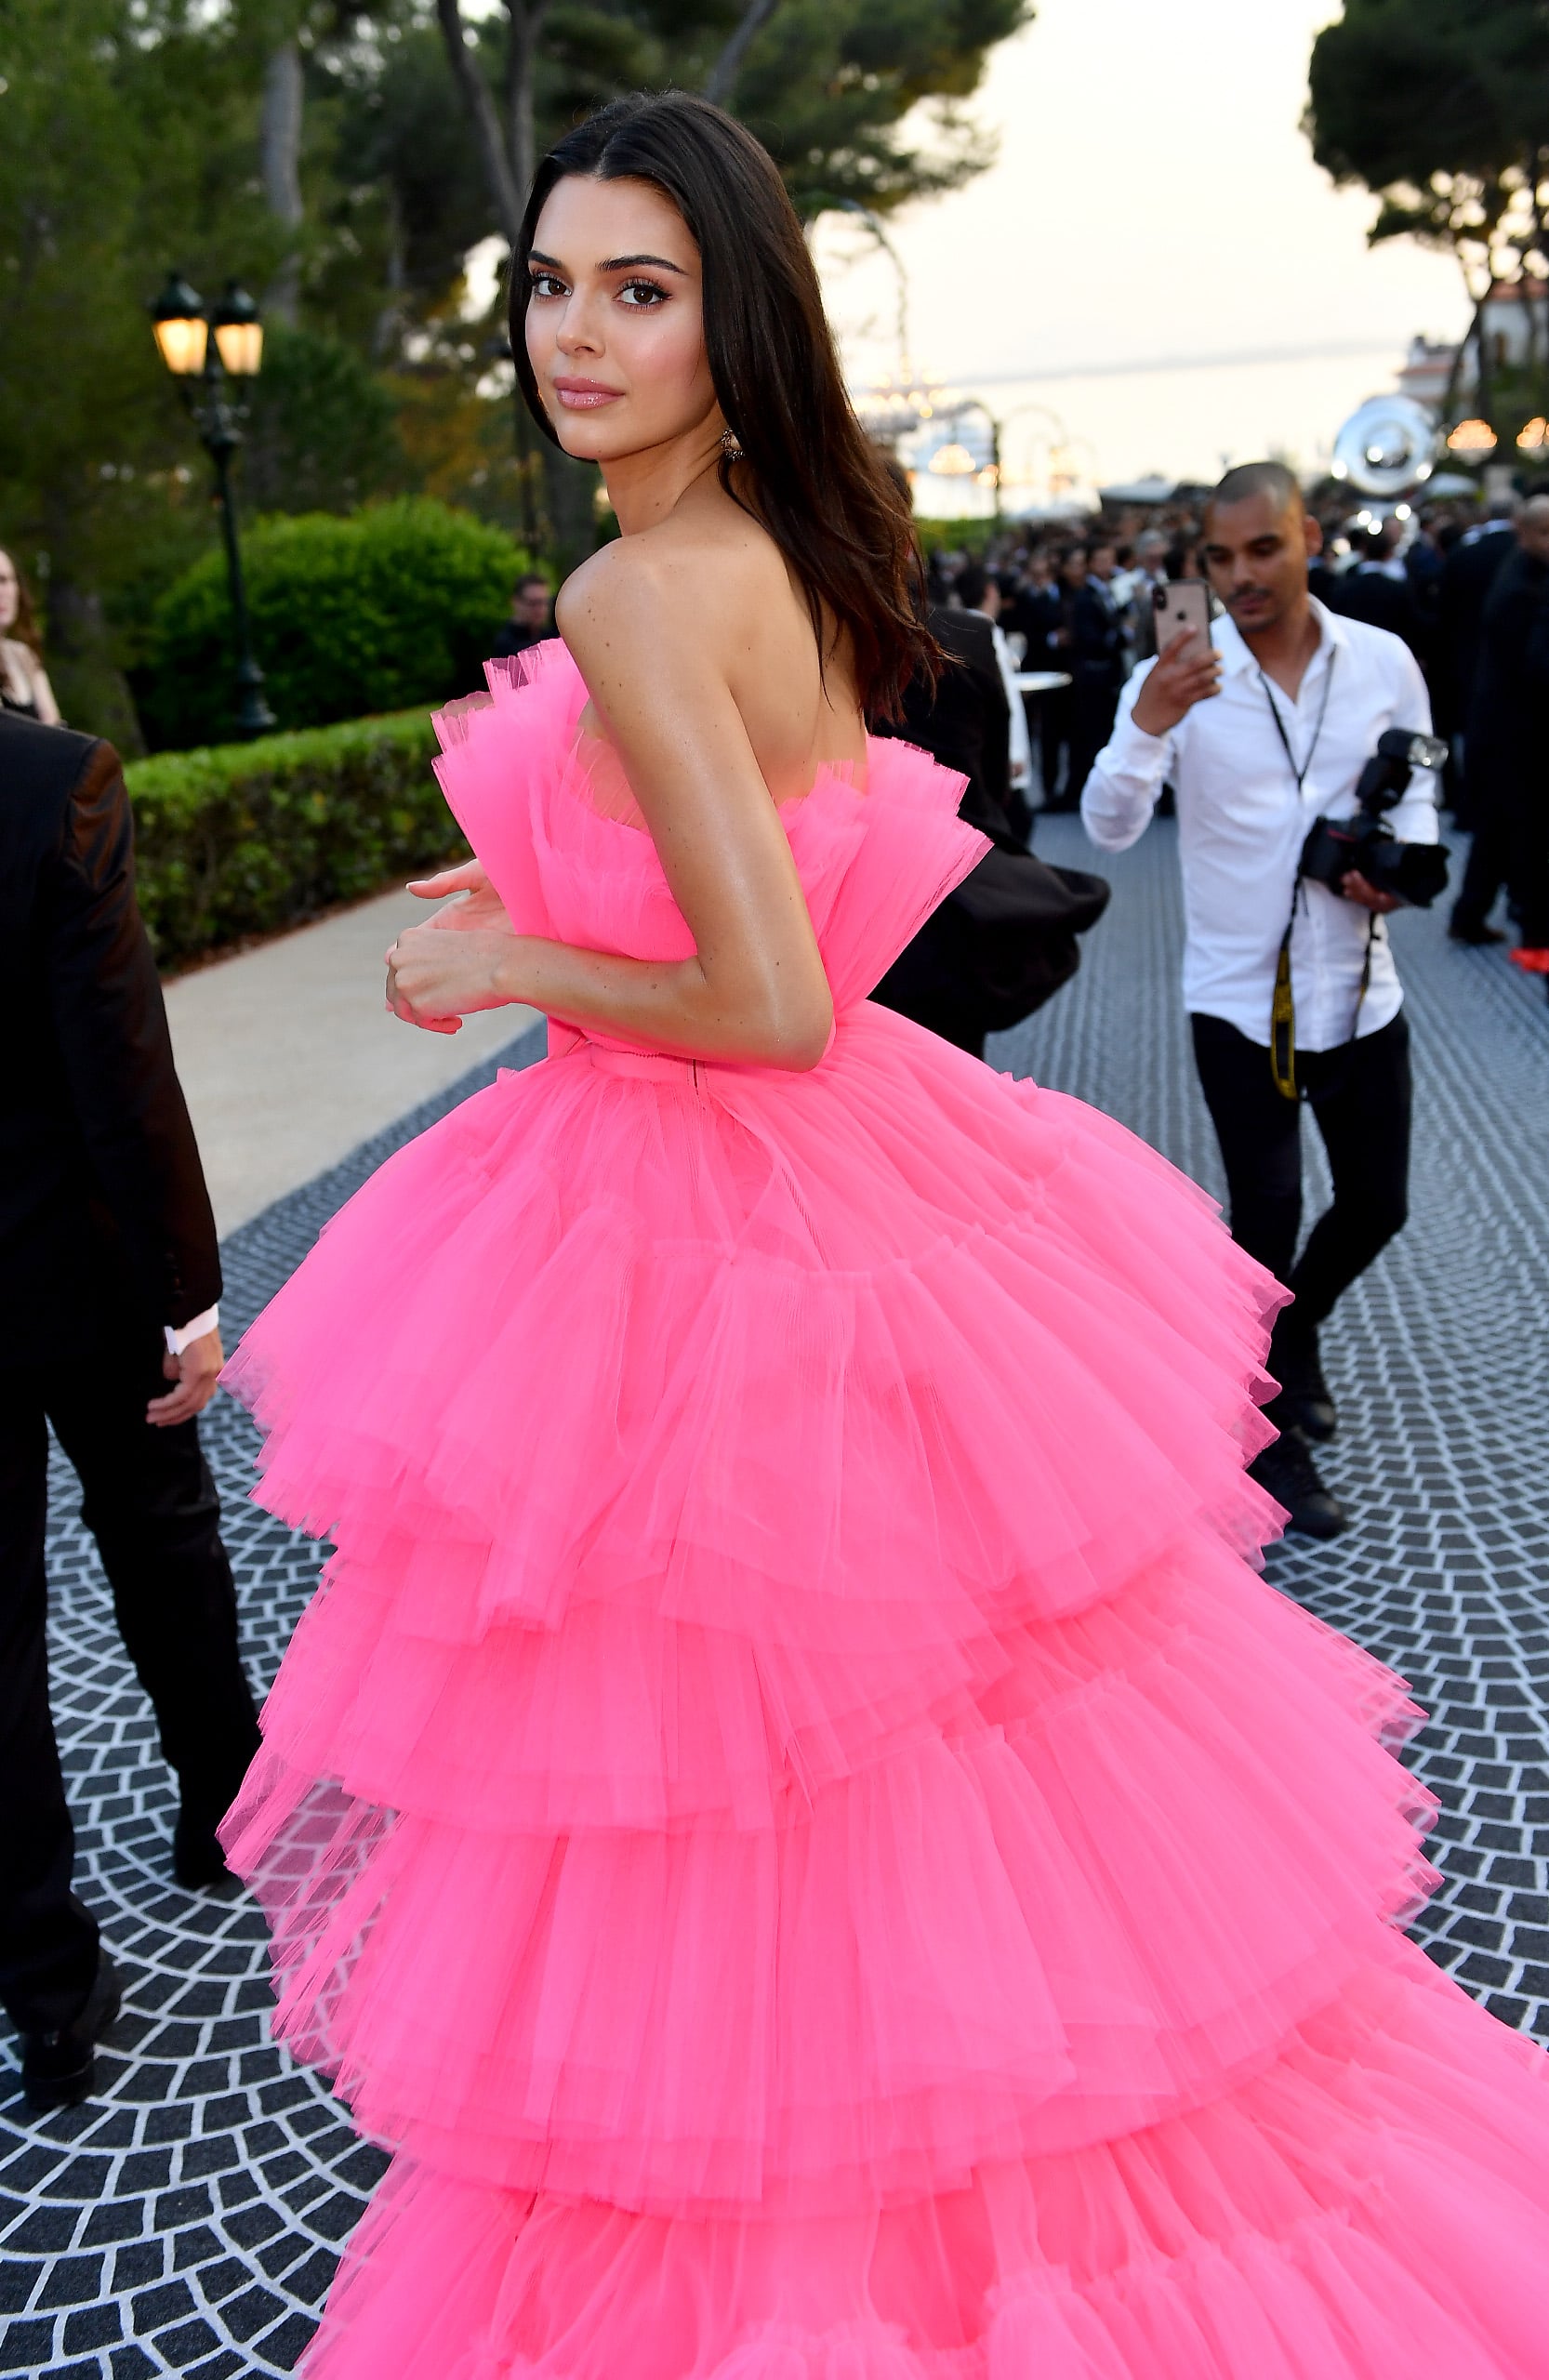 Fashion, Shopping & Style | Kendall Jenner's Voluminous Pink Dress Looks  Sort of Like a Loofah, but in a Really Pretty Way | POPSUGAR Fashion UK  Photo 28